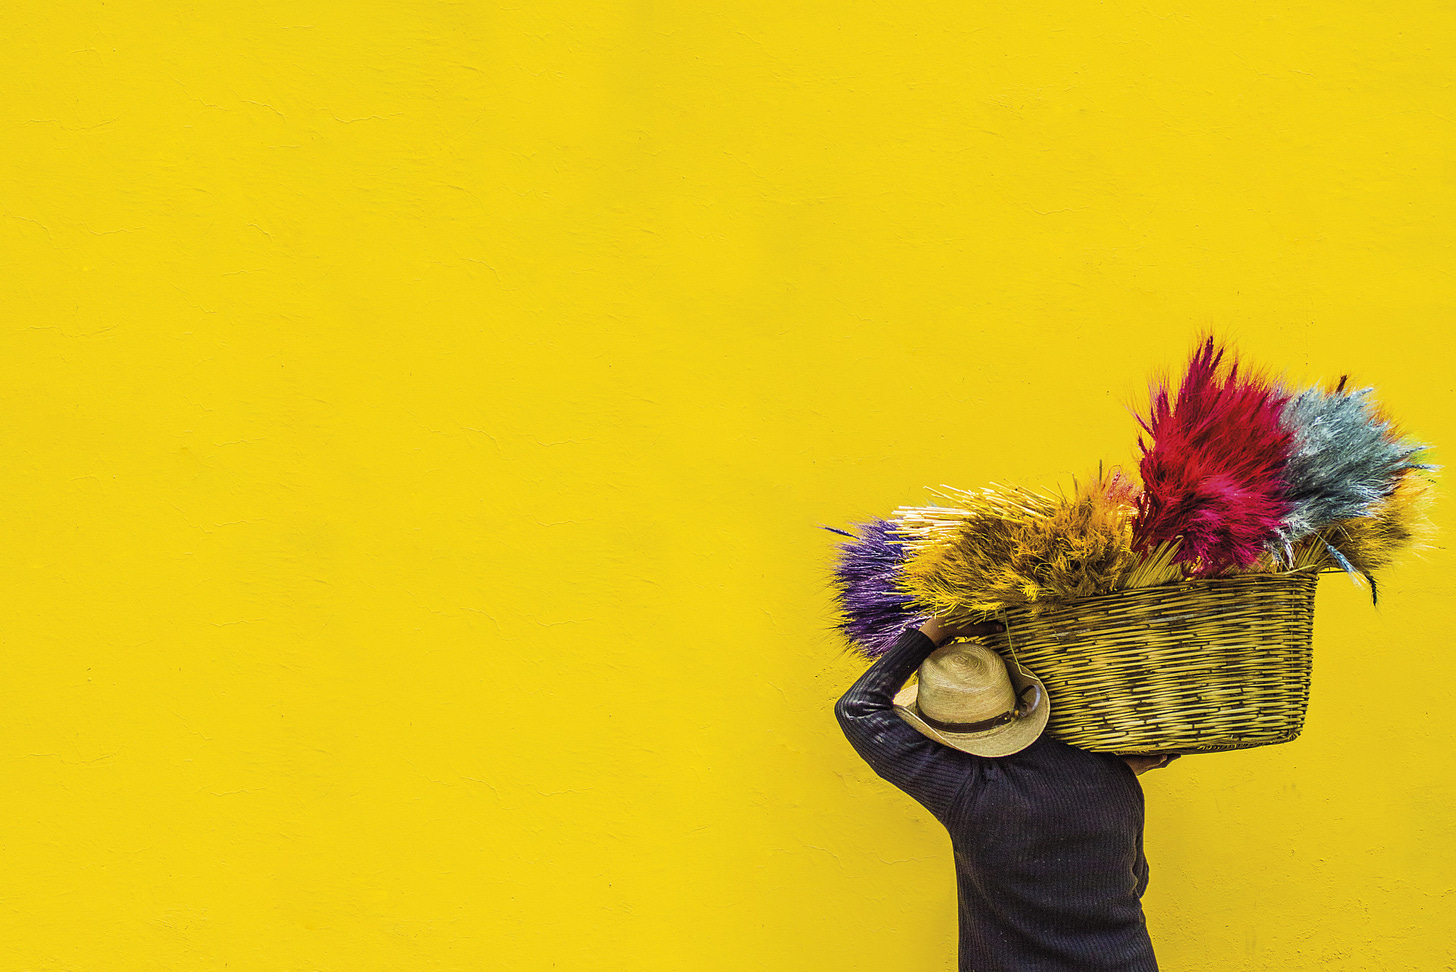 A Guatemalan man carries a basket of brightly colored plants. The color contrasts with the yellow wall in front of him.